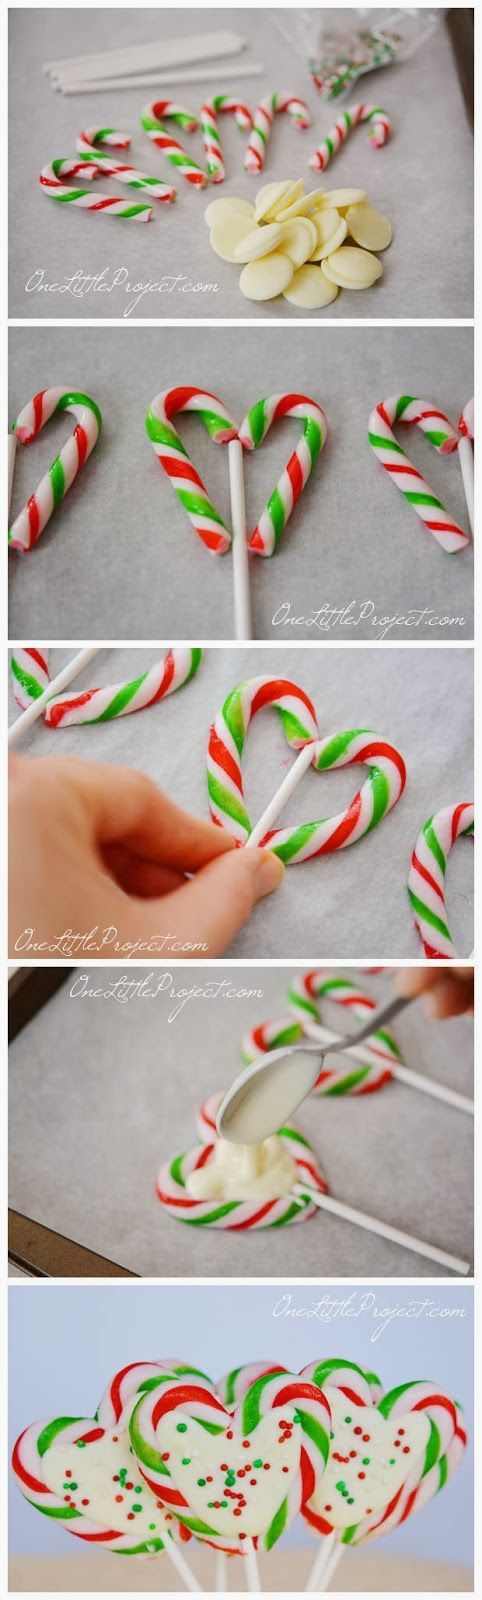 Candy Cane Hearts! They make the perfect gift for the holidays!